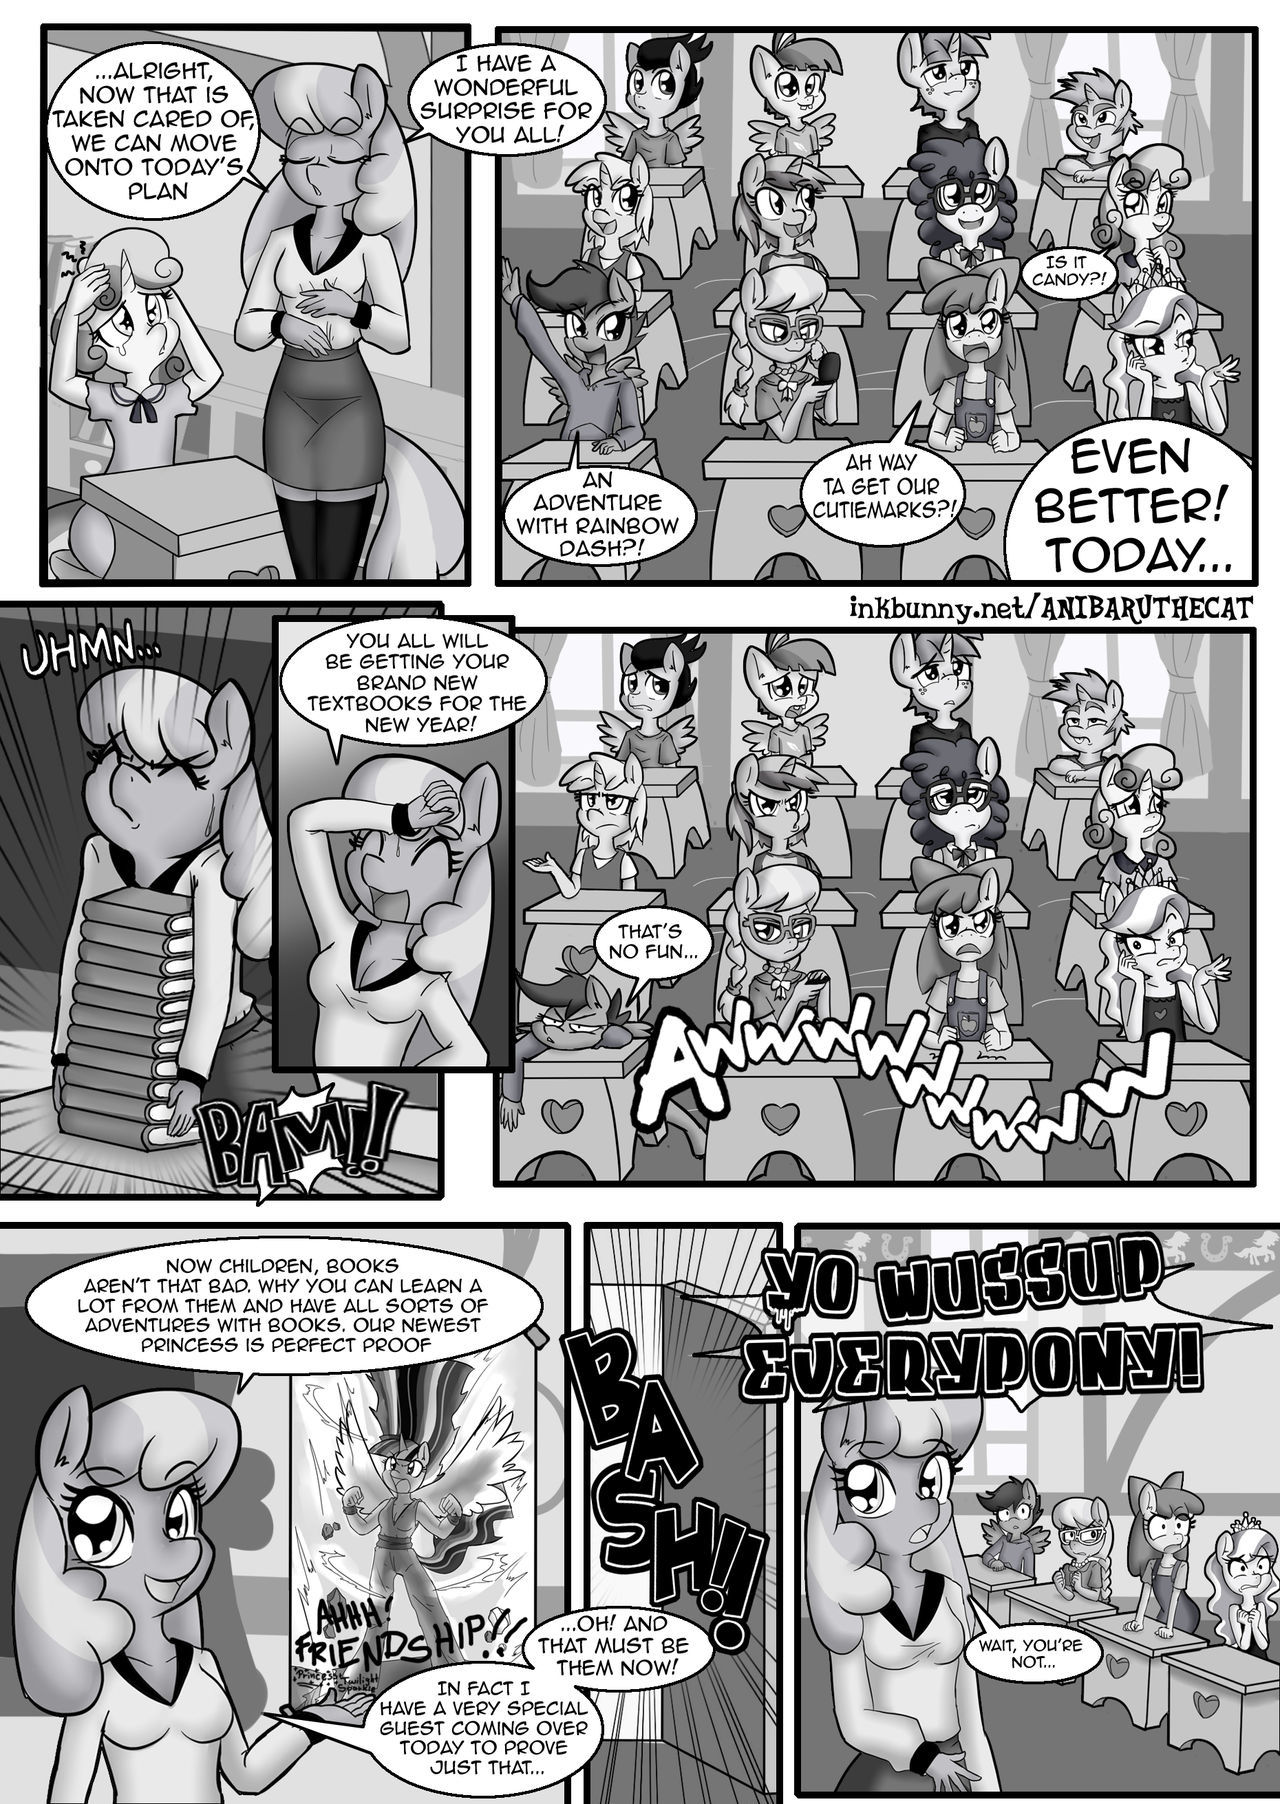 Gang Bangerz My little Pony by AnibarutheCat page 4